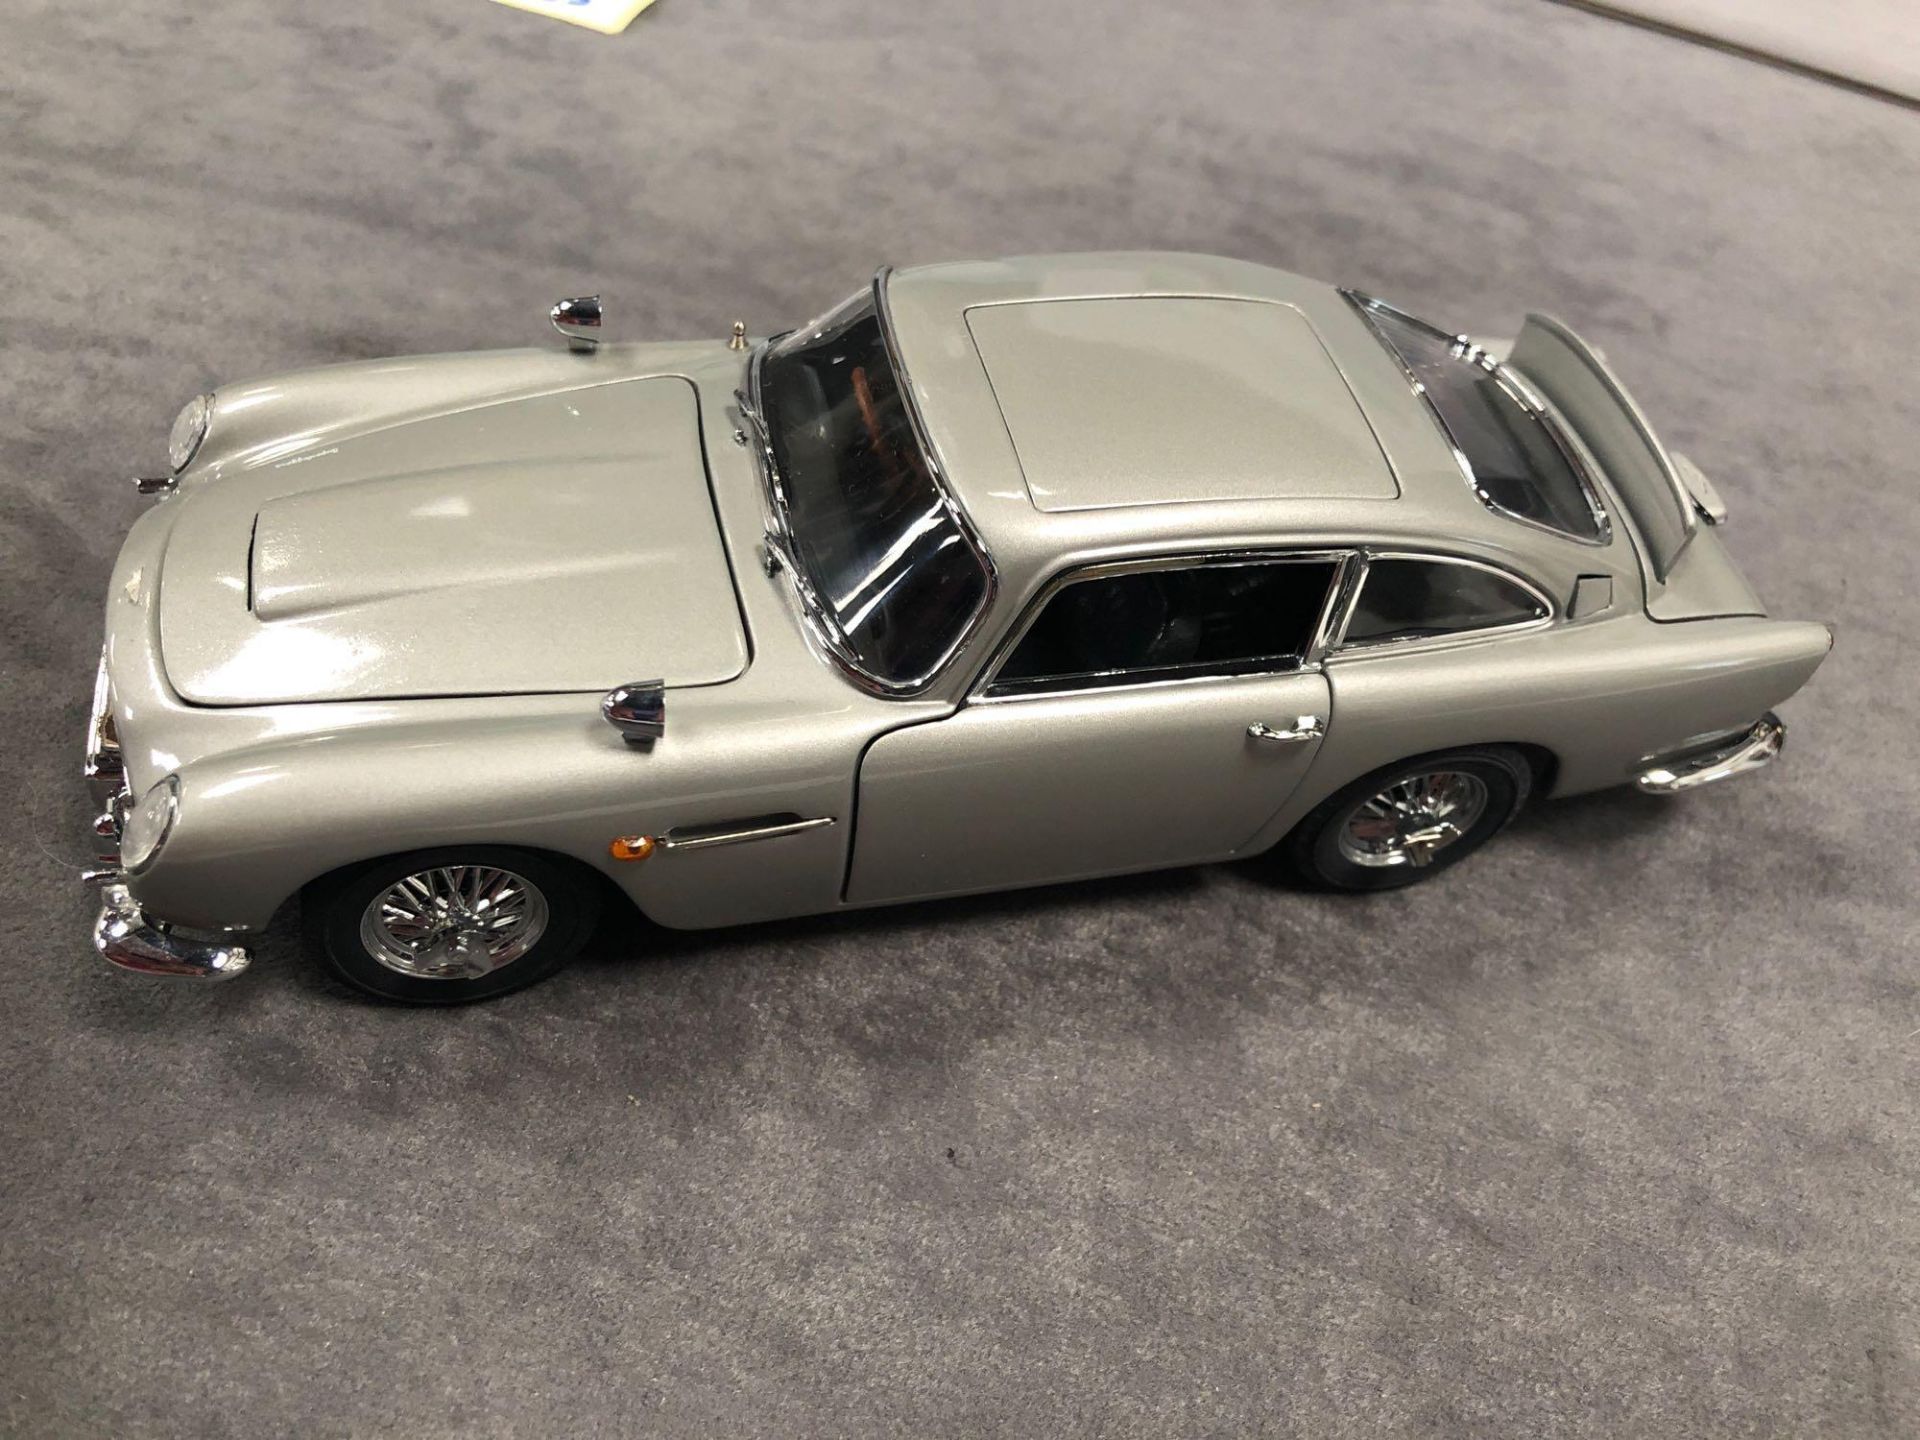 Mint Danbury Mint Aston Martin Db5 James Bond 007 Limited Edition Special Addition With Case, Box, - Image 2 of 4